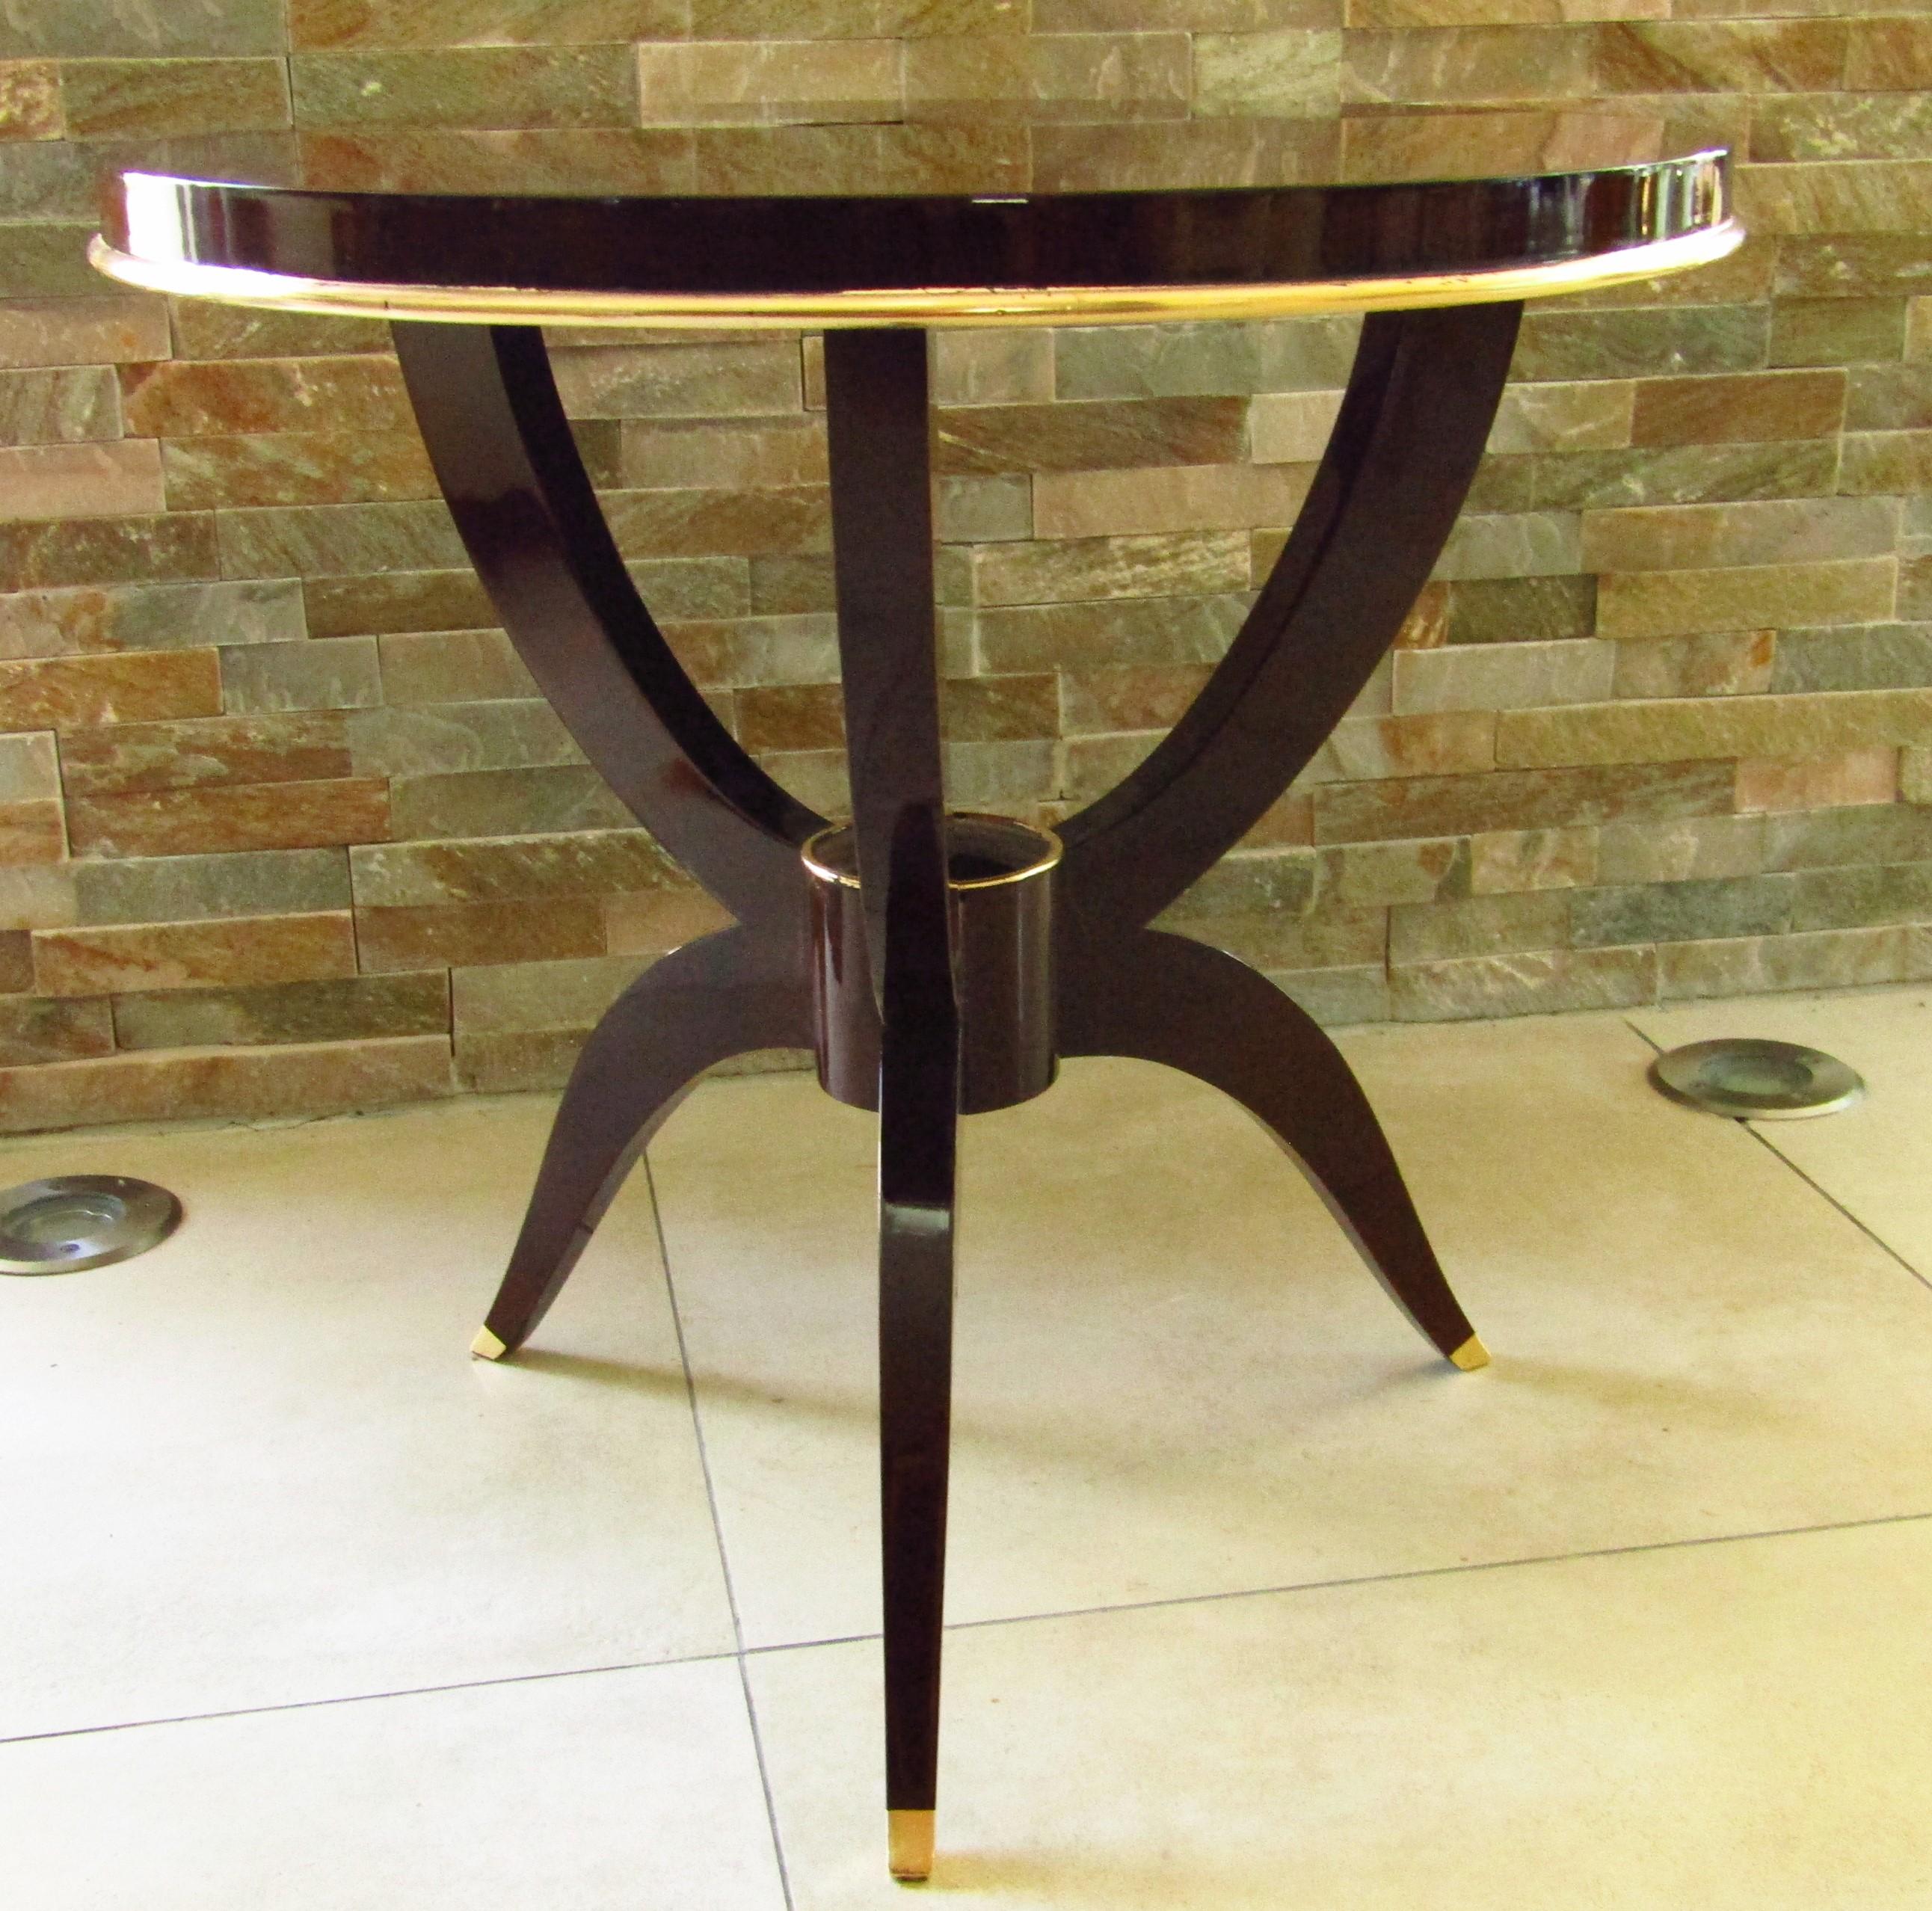 1930 side table